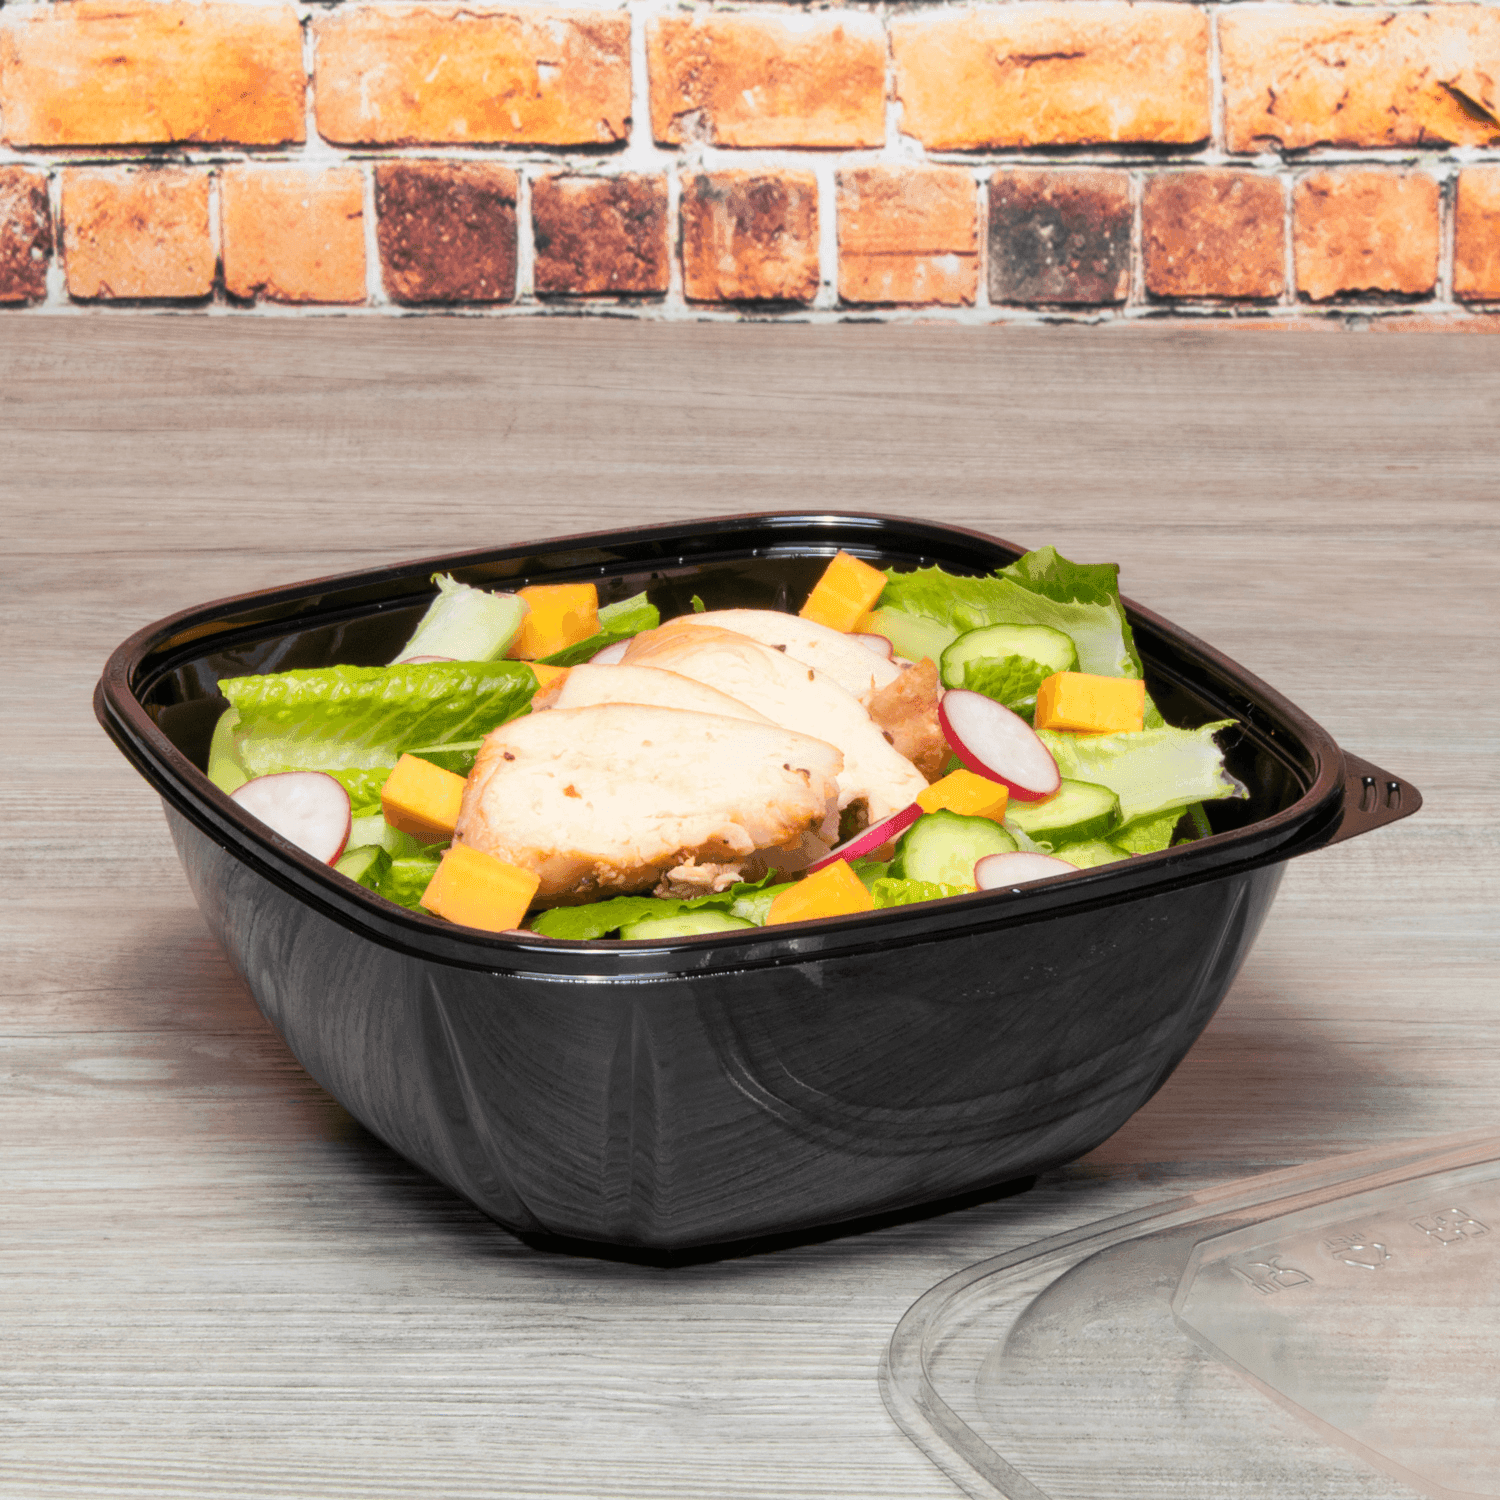 Black Karat 48oz PET Square Bowl with salad and grilled chicken